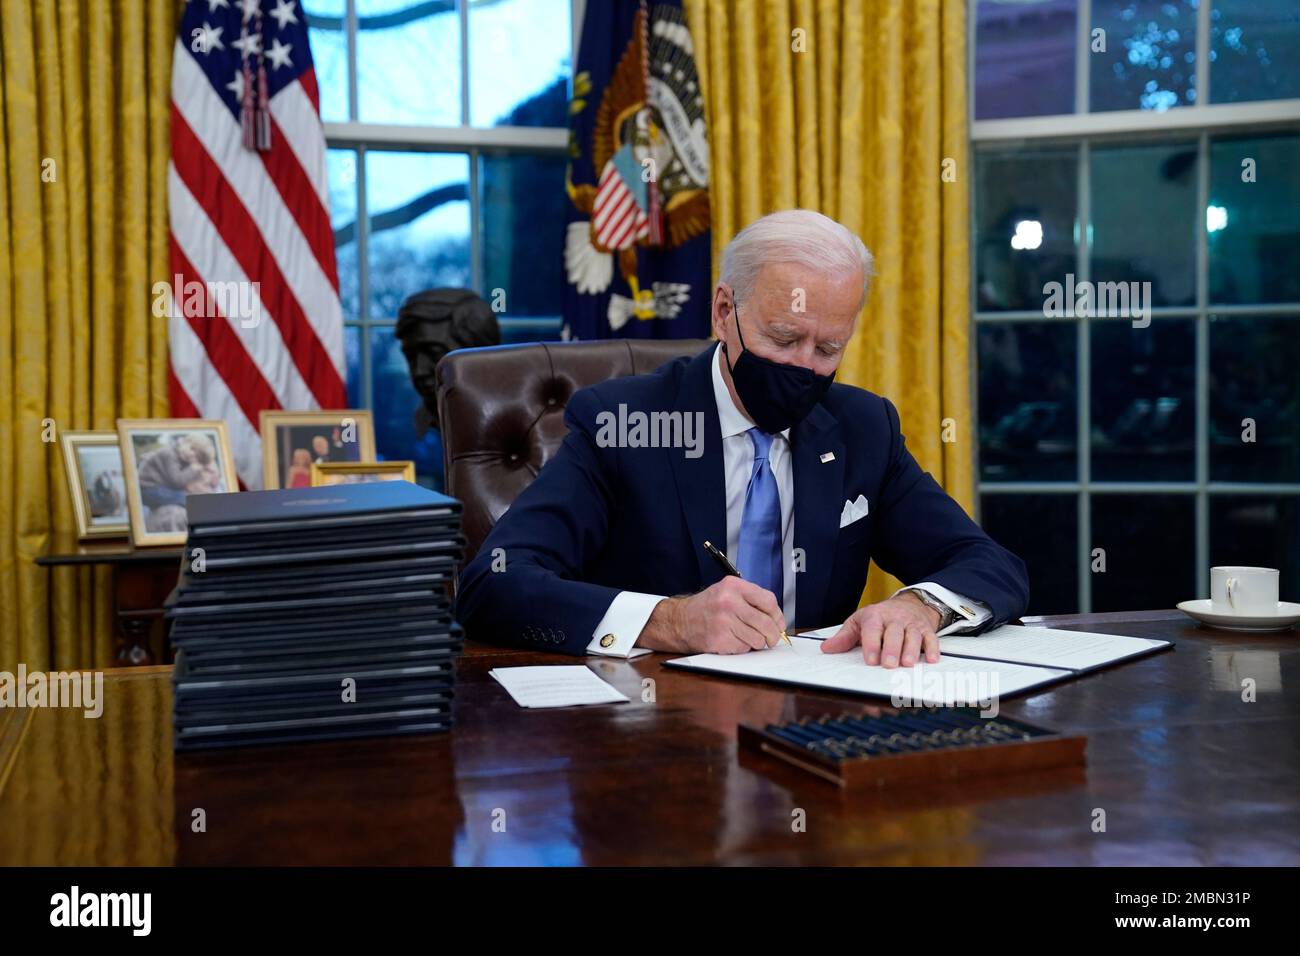 FILE - In this Jan. 20, 2021, file photo, President Joe Biden signs his first executive order in the Oval Office of the White House in Washington.Biden laid out an ambitious agenda for his first 100 days in office, promising swift action on everything from climate change to immigration reform to the coronavirus pandemic. Key members of the White House Environmental Justice Advisory Council say one year into the Biden Administration's commitment that 40% of all benefits from climate investment go to disenfranchised communities, not enough has been done. (AP Photo/Evan Vucci, File) Stock Photo